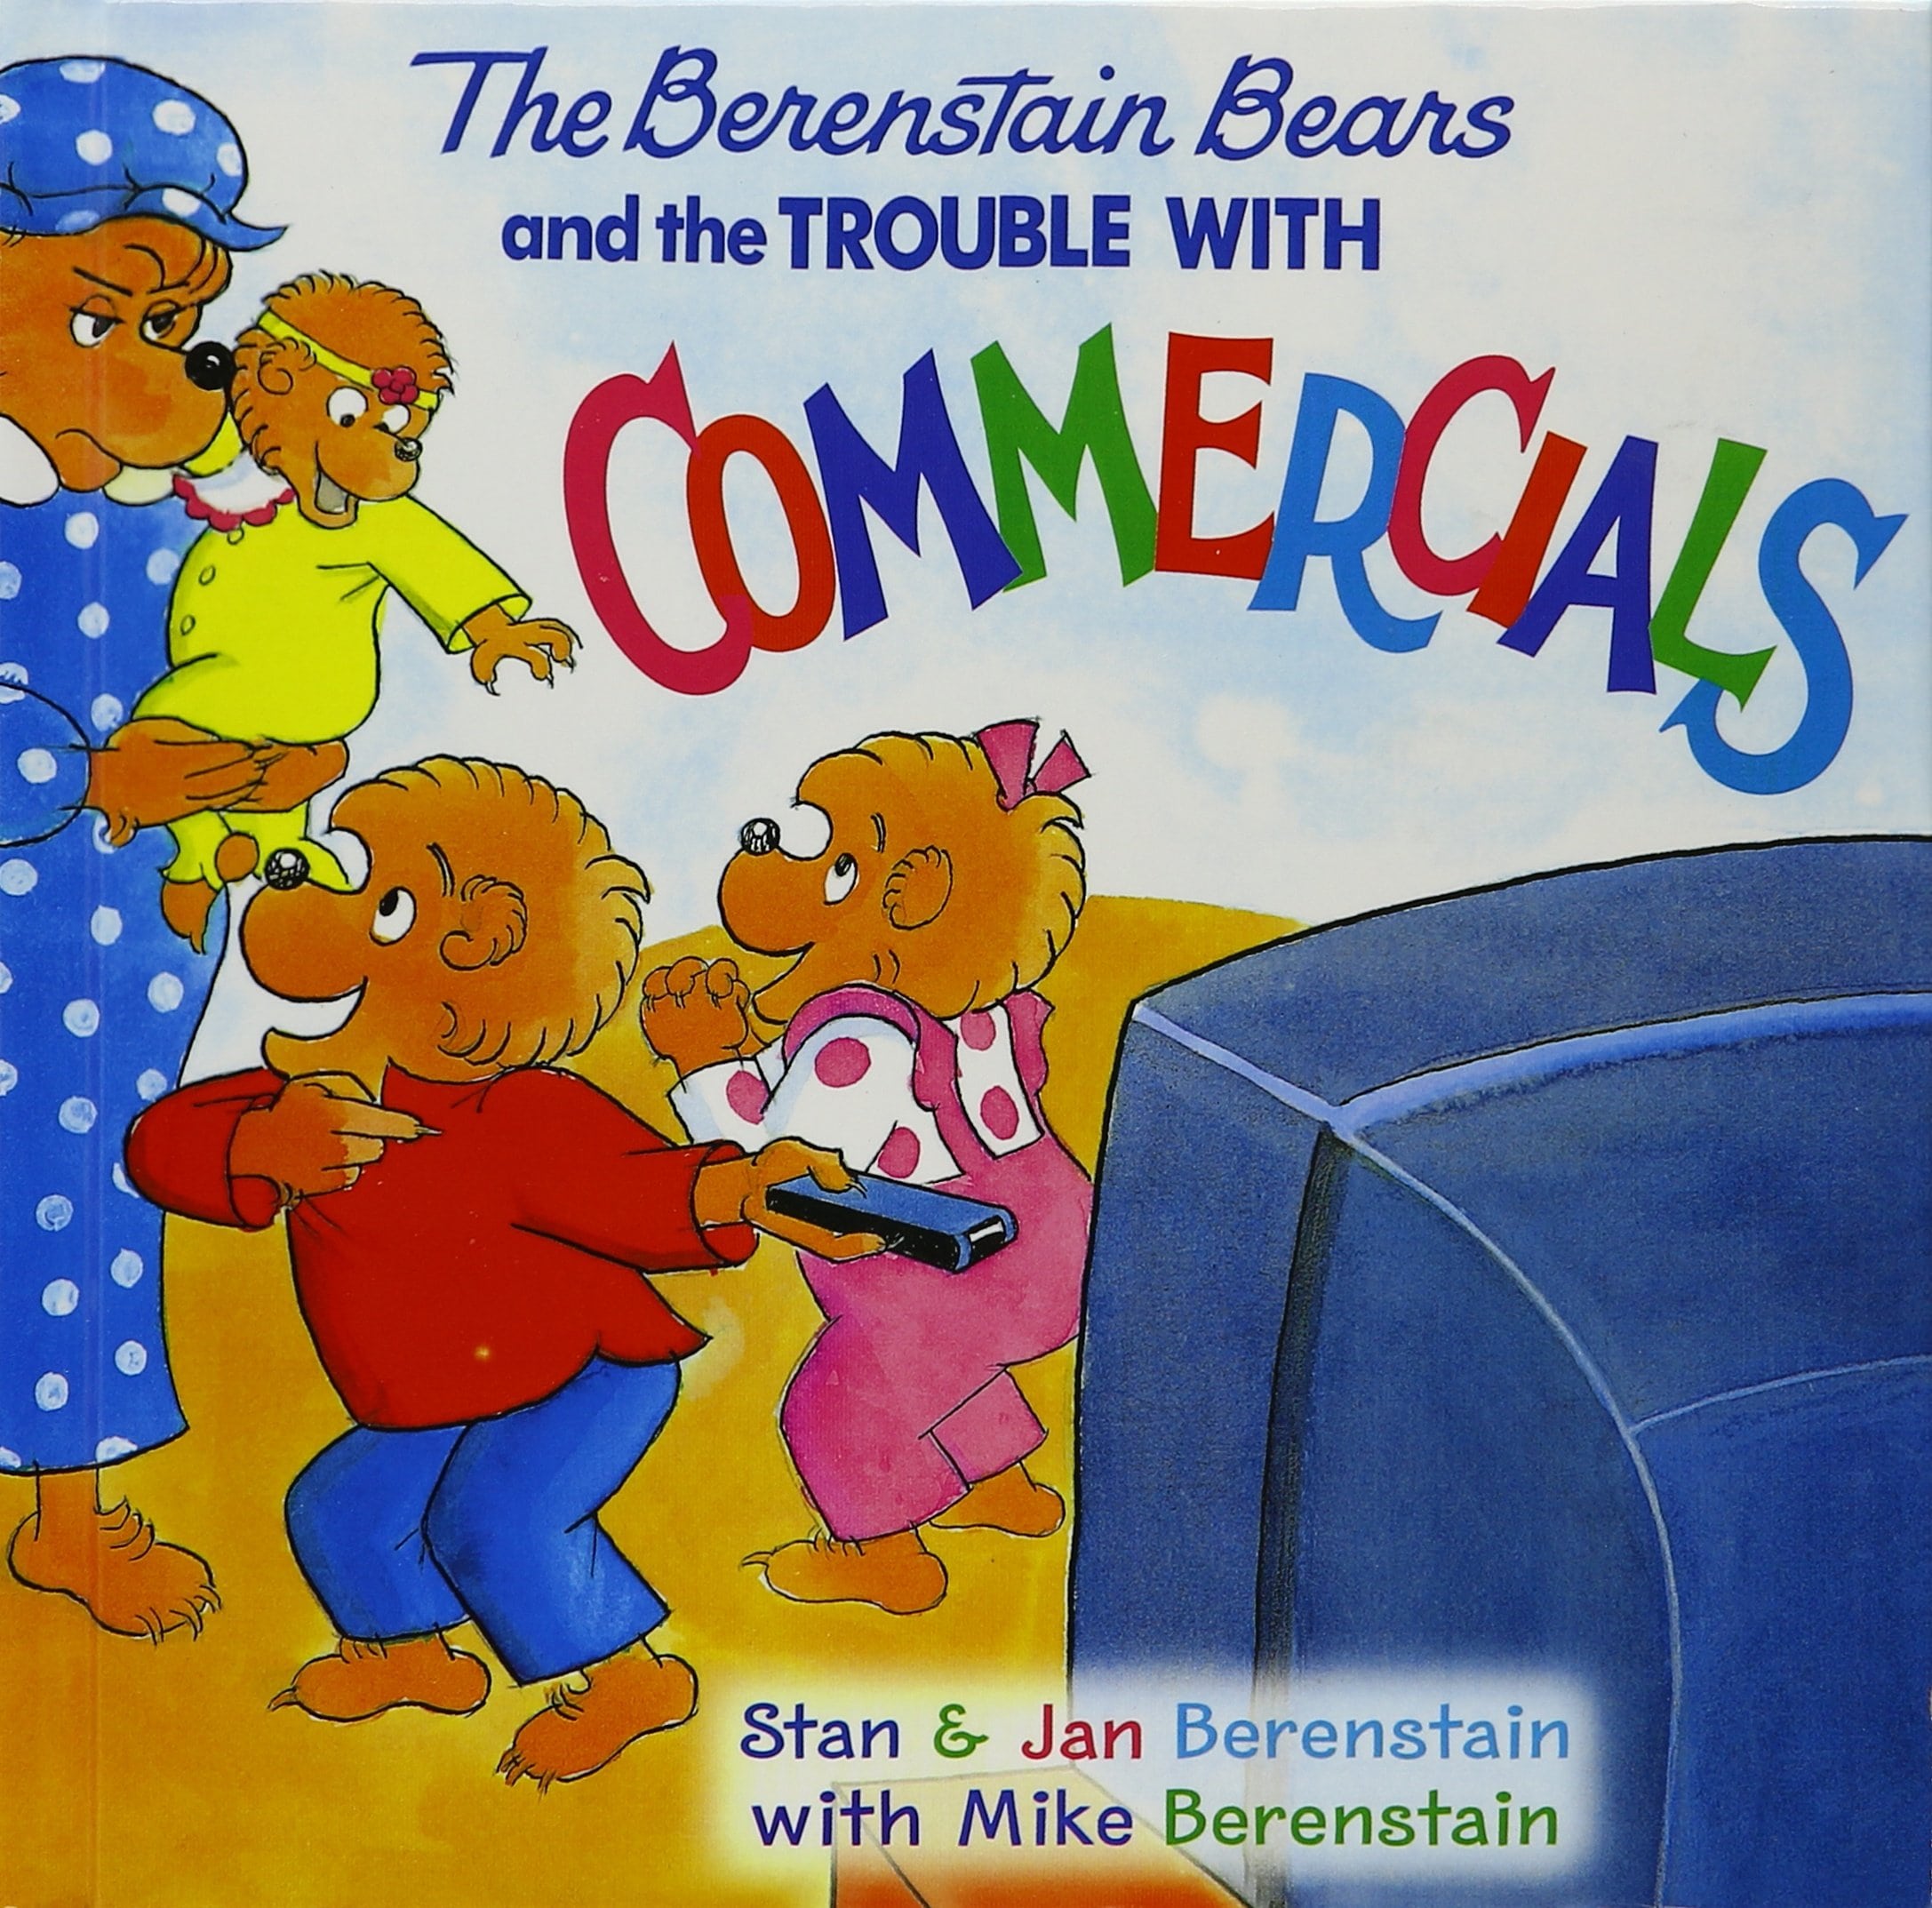 IMG : The Berenstain Bears and the trouble with commercials